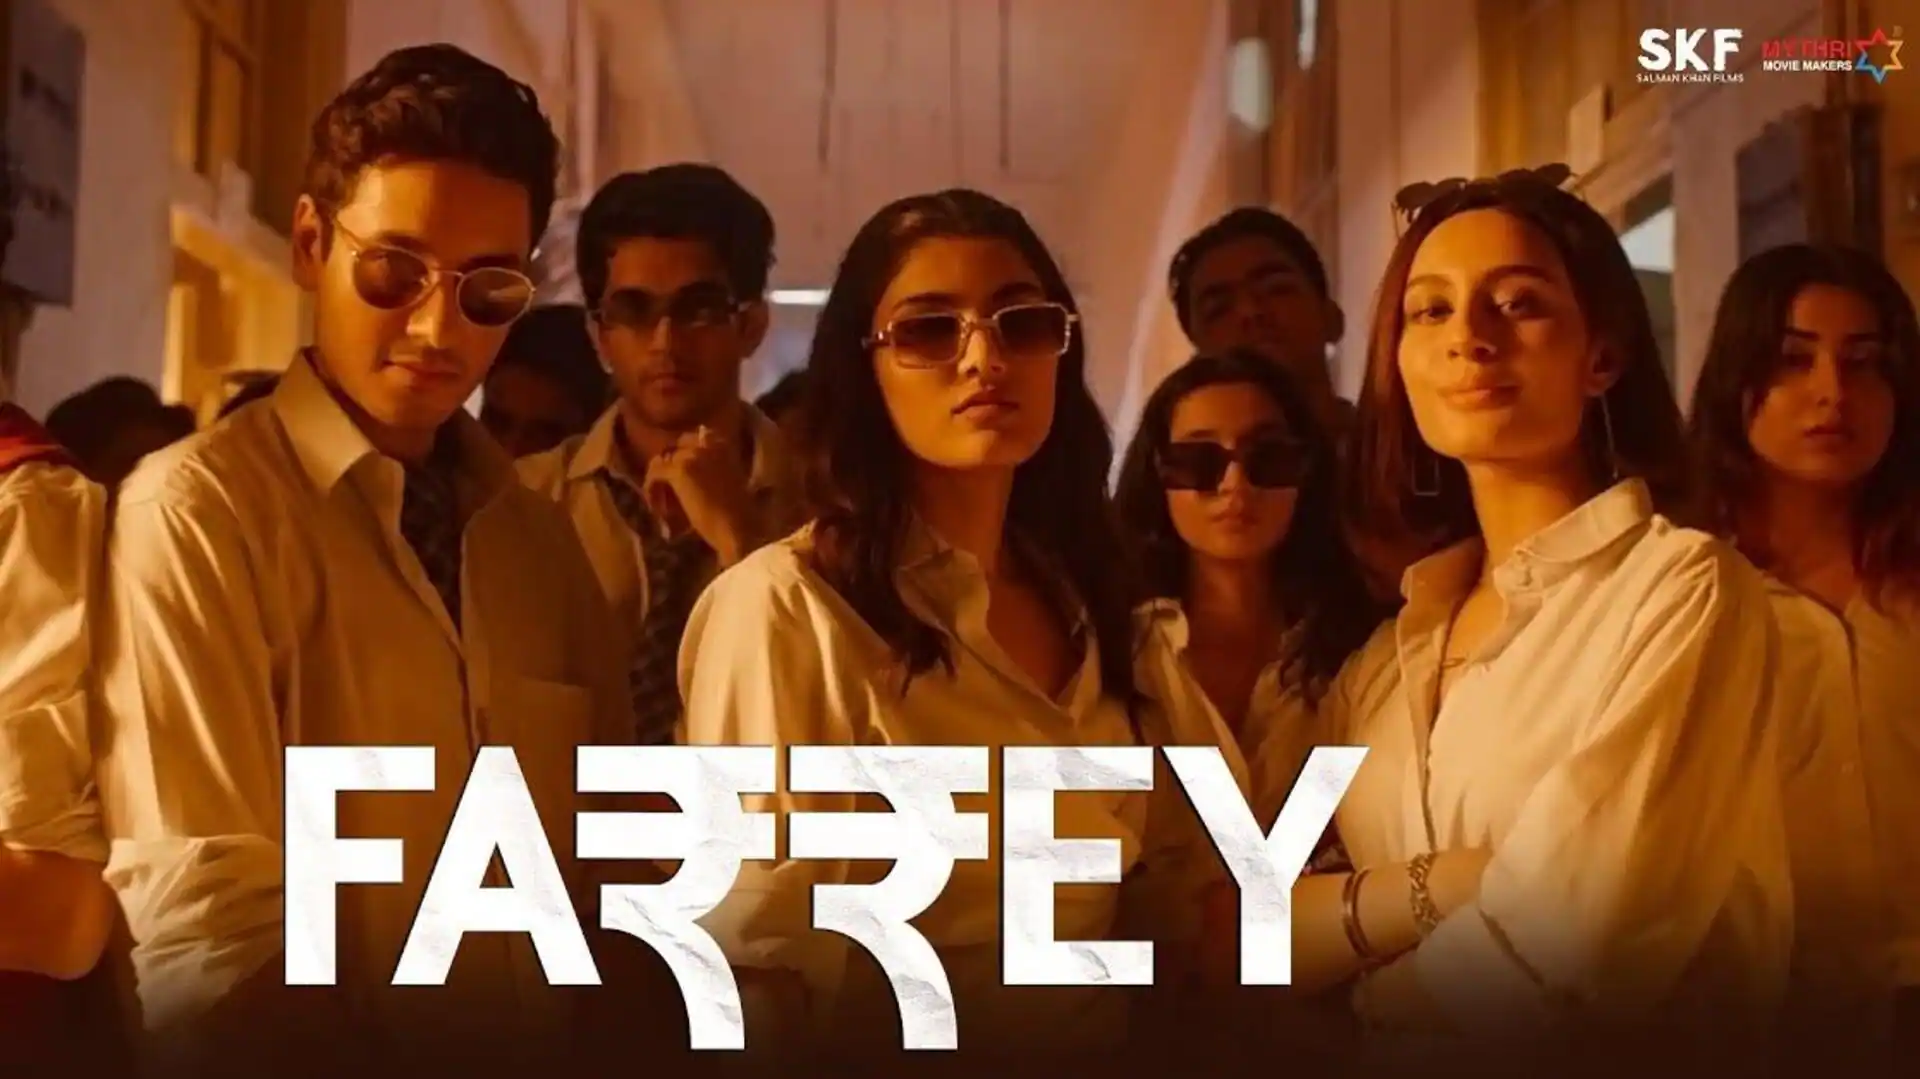 Read more about the article Farrey Movie Download Filmyzilla 1080p, 720p Review